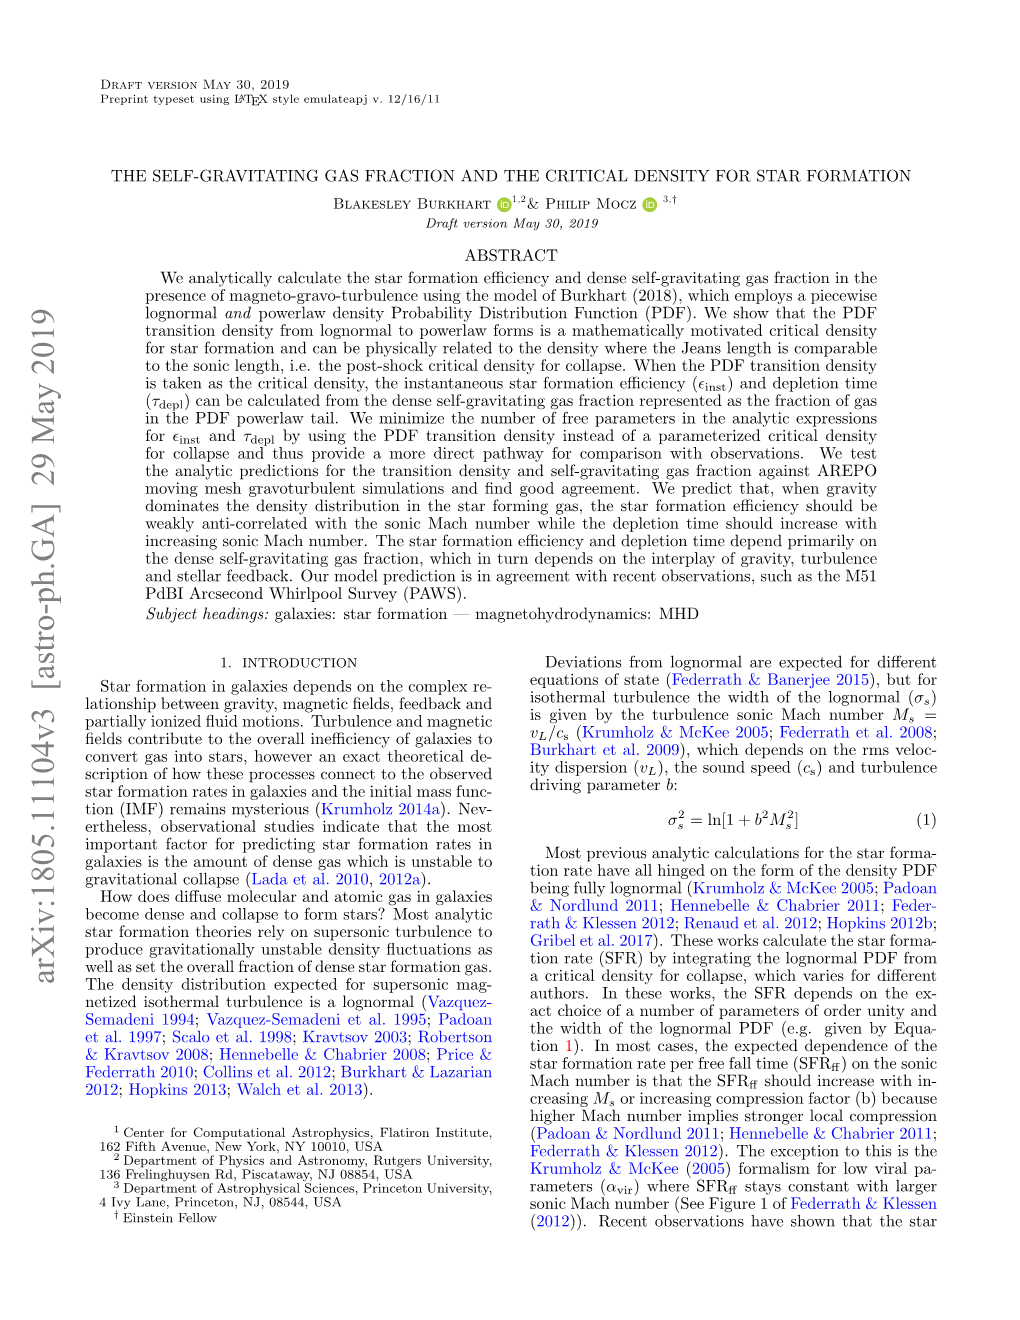 Arxiv:1805.11104V3 [Astro-Ph.GA] 29 May 2019 a Critical Density for Collapse, Which Varies for Diﬀerent the Density Distribution Expected for Supersonic Mag- Authors